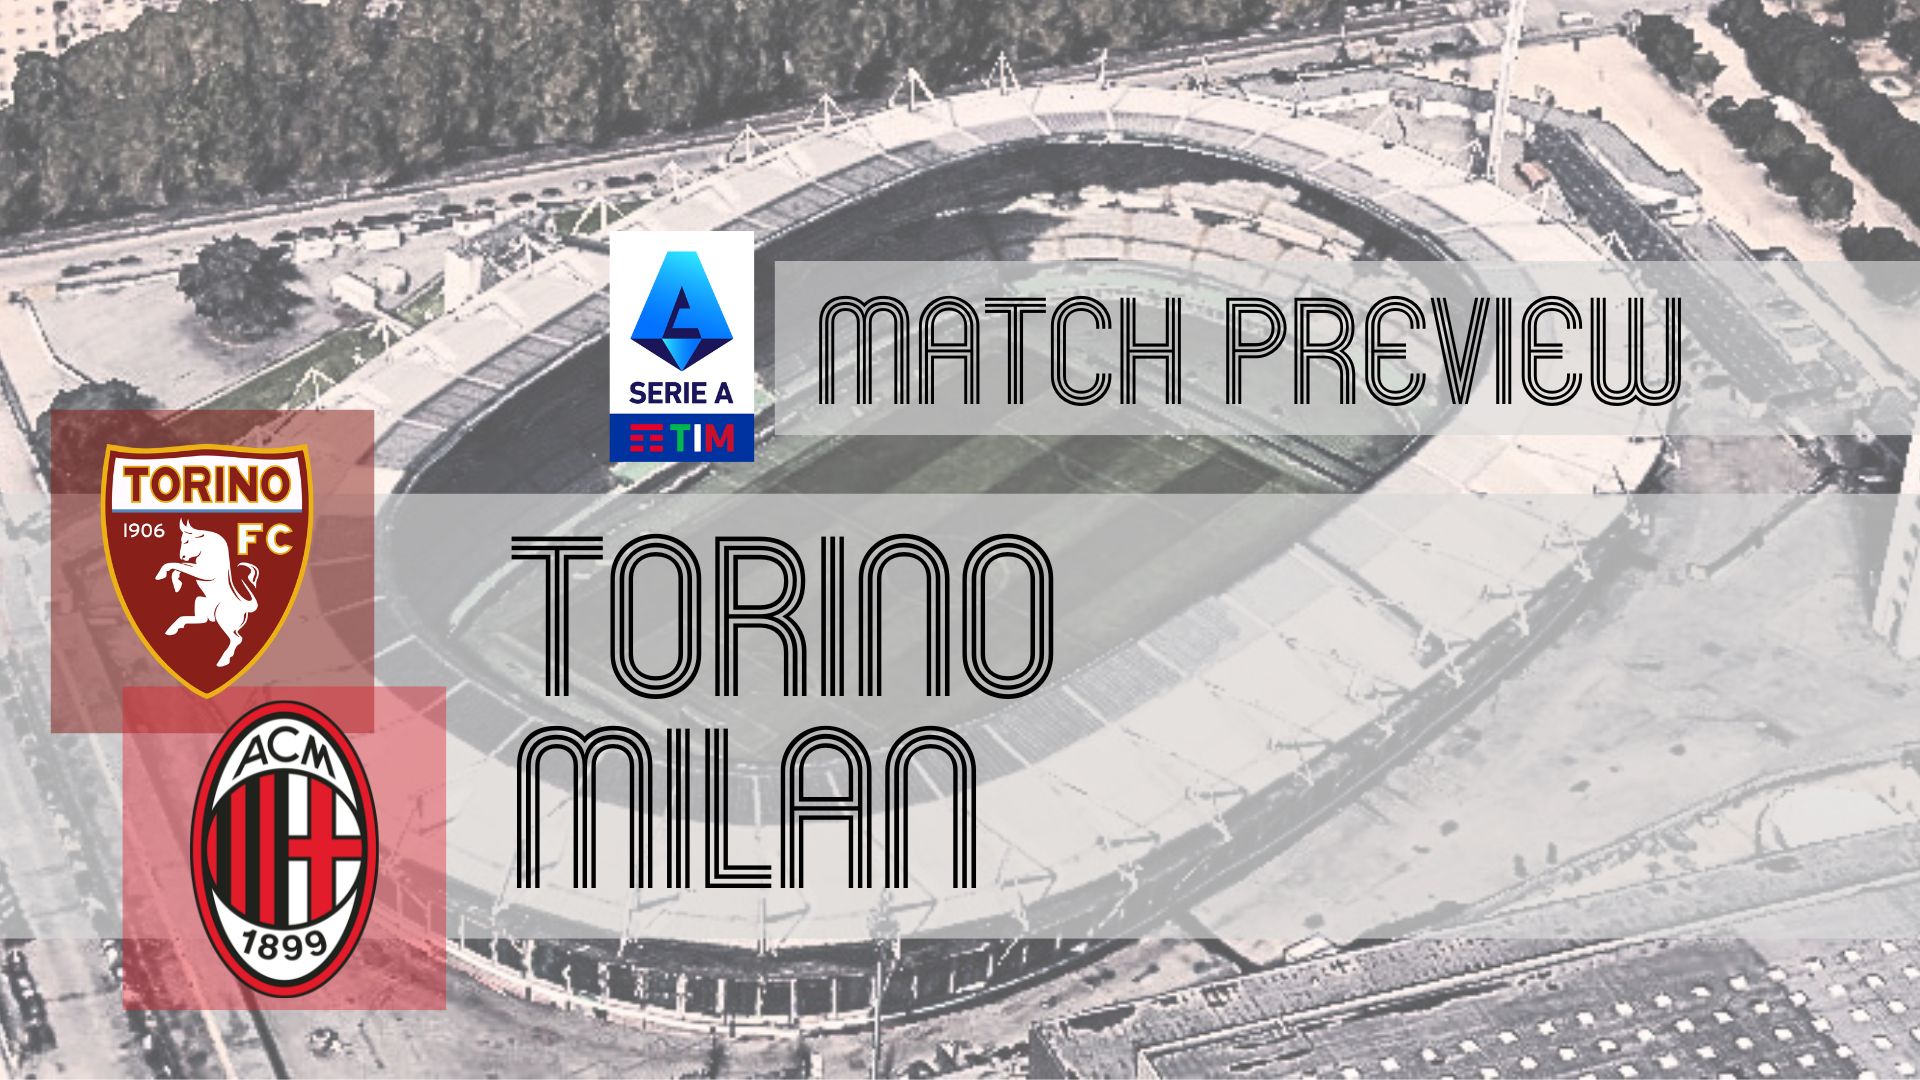 Serie A runners-up Milan head to the Stadio Olimpico di Torino to take on unlikely European hopefuls Torino in the penultimate round